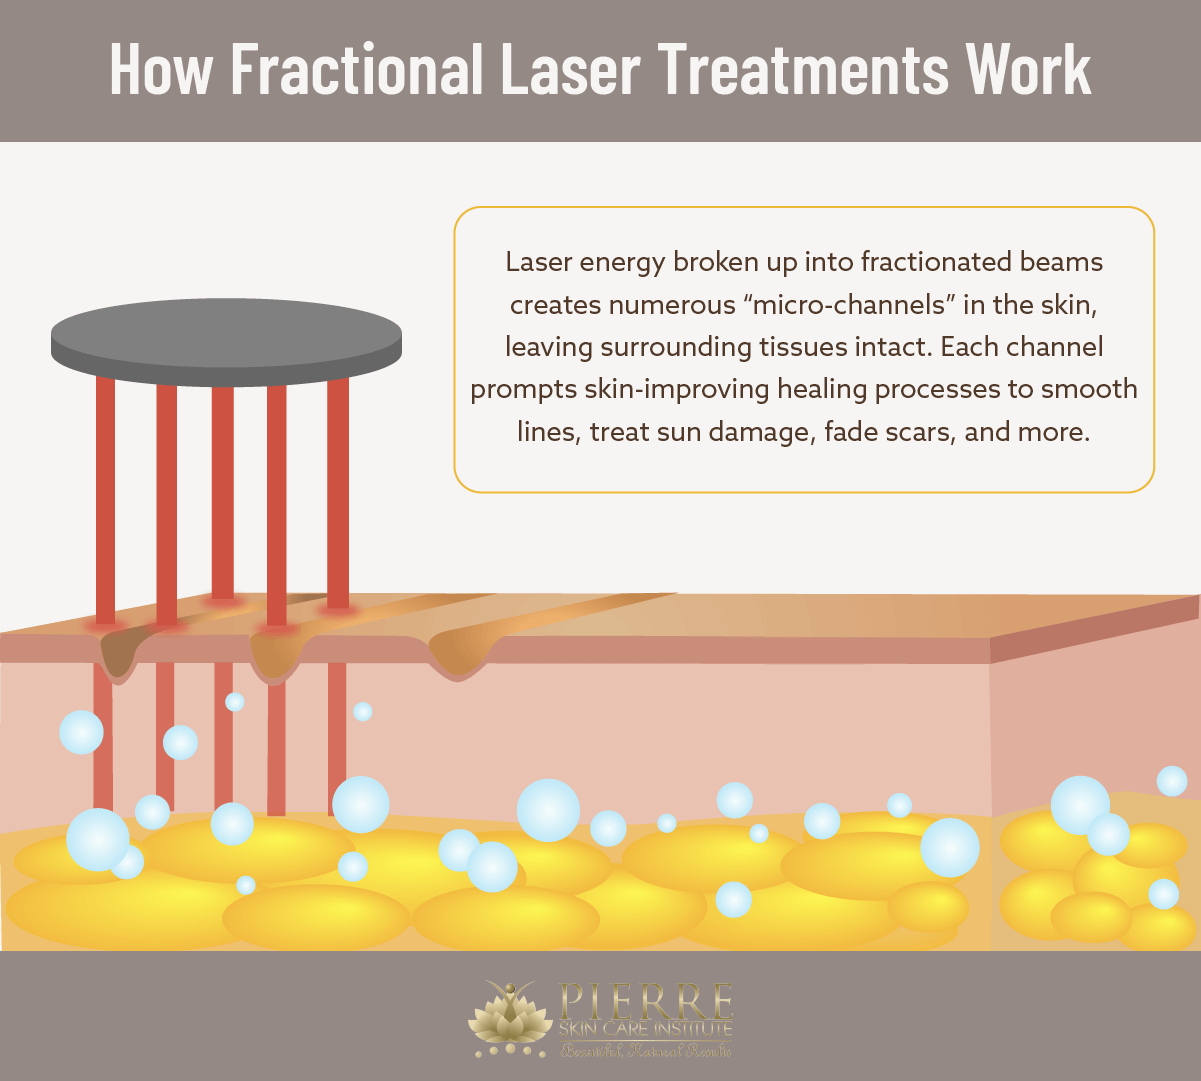 Learn more about laser skin resurfacing at Thousand Oaks’ Pierre Skin Care Institute.